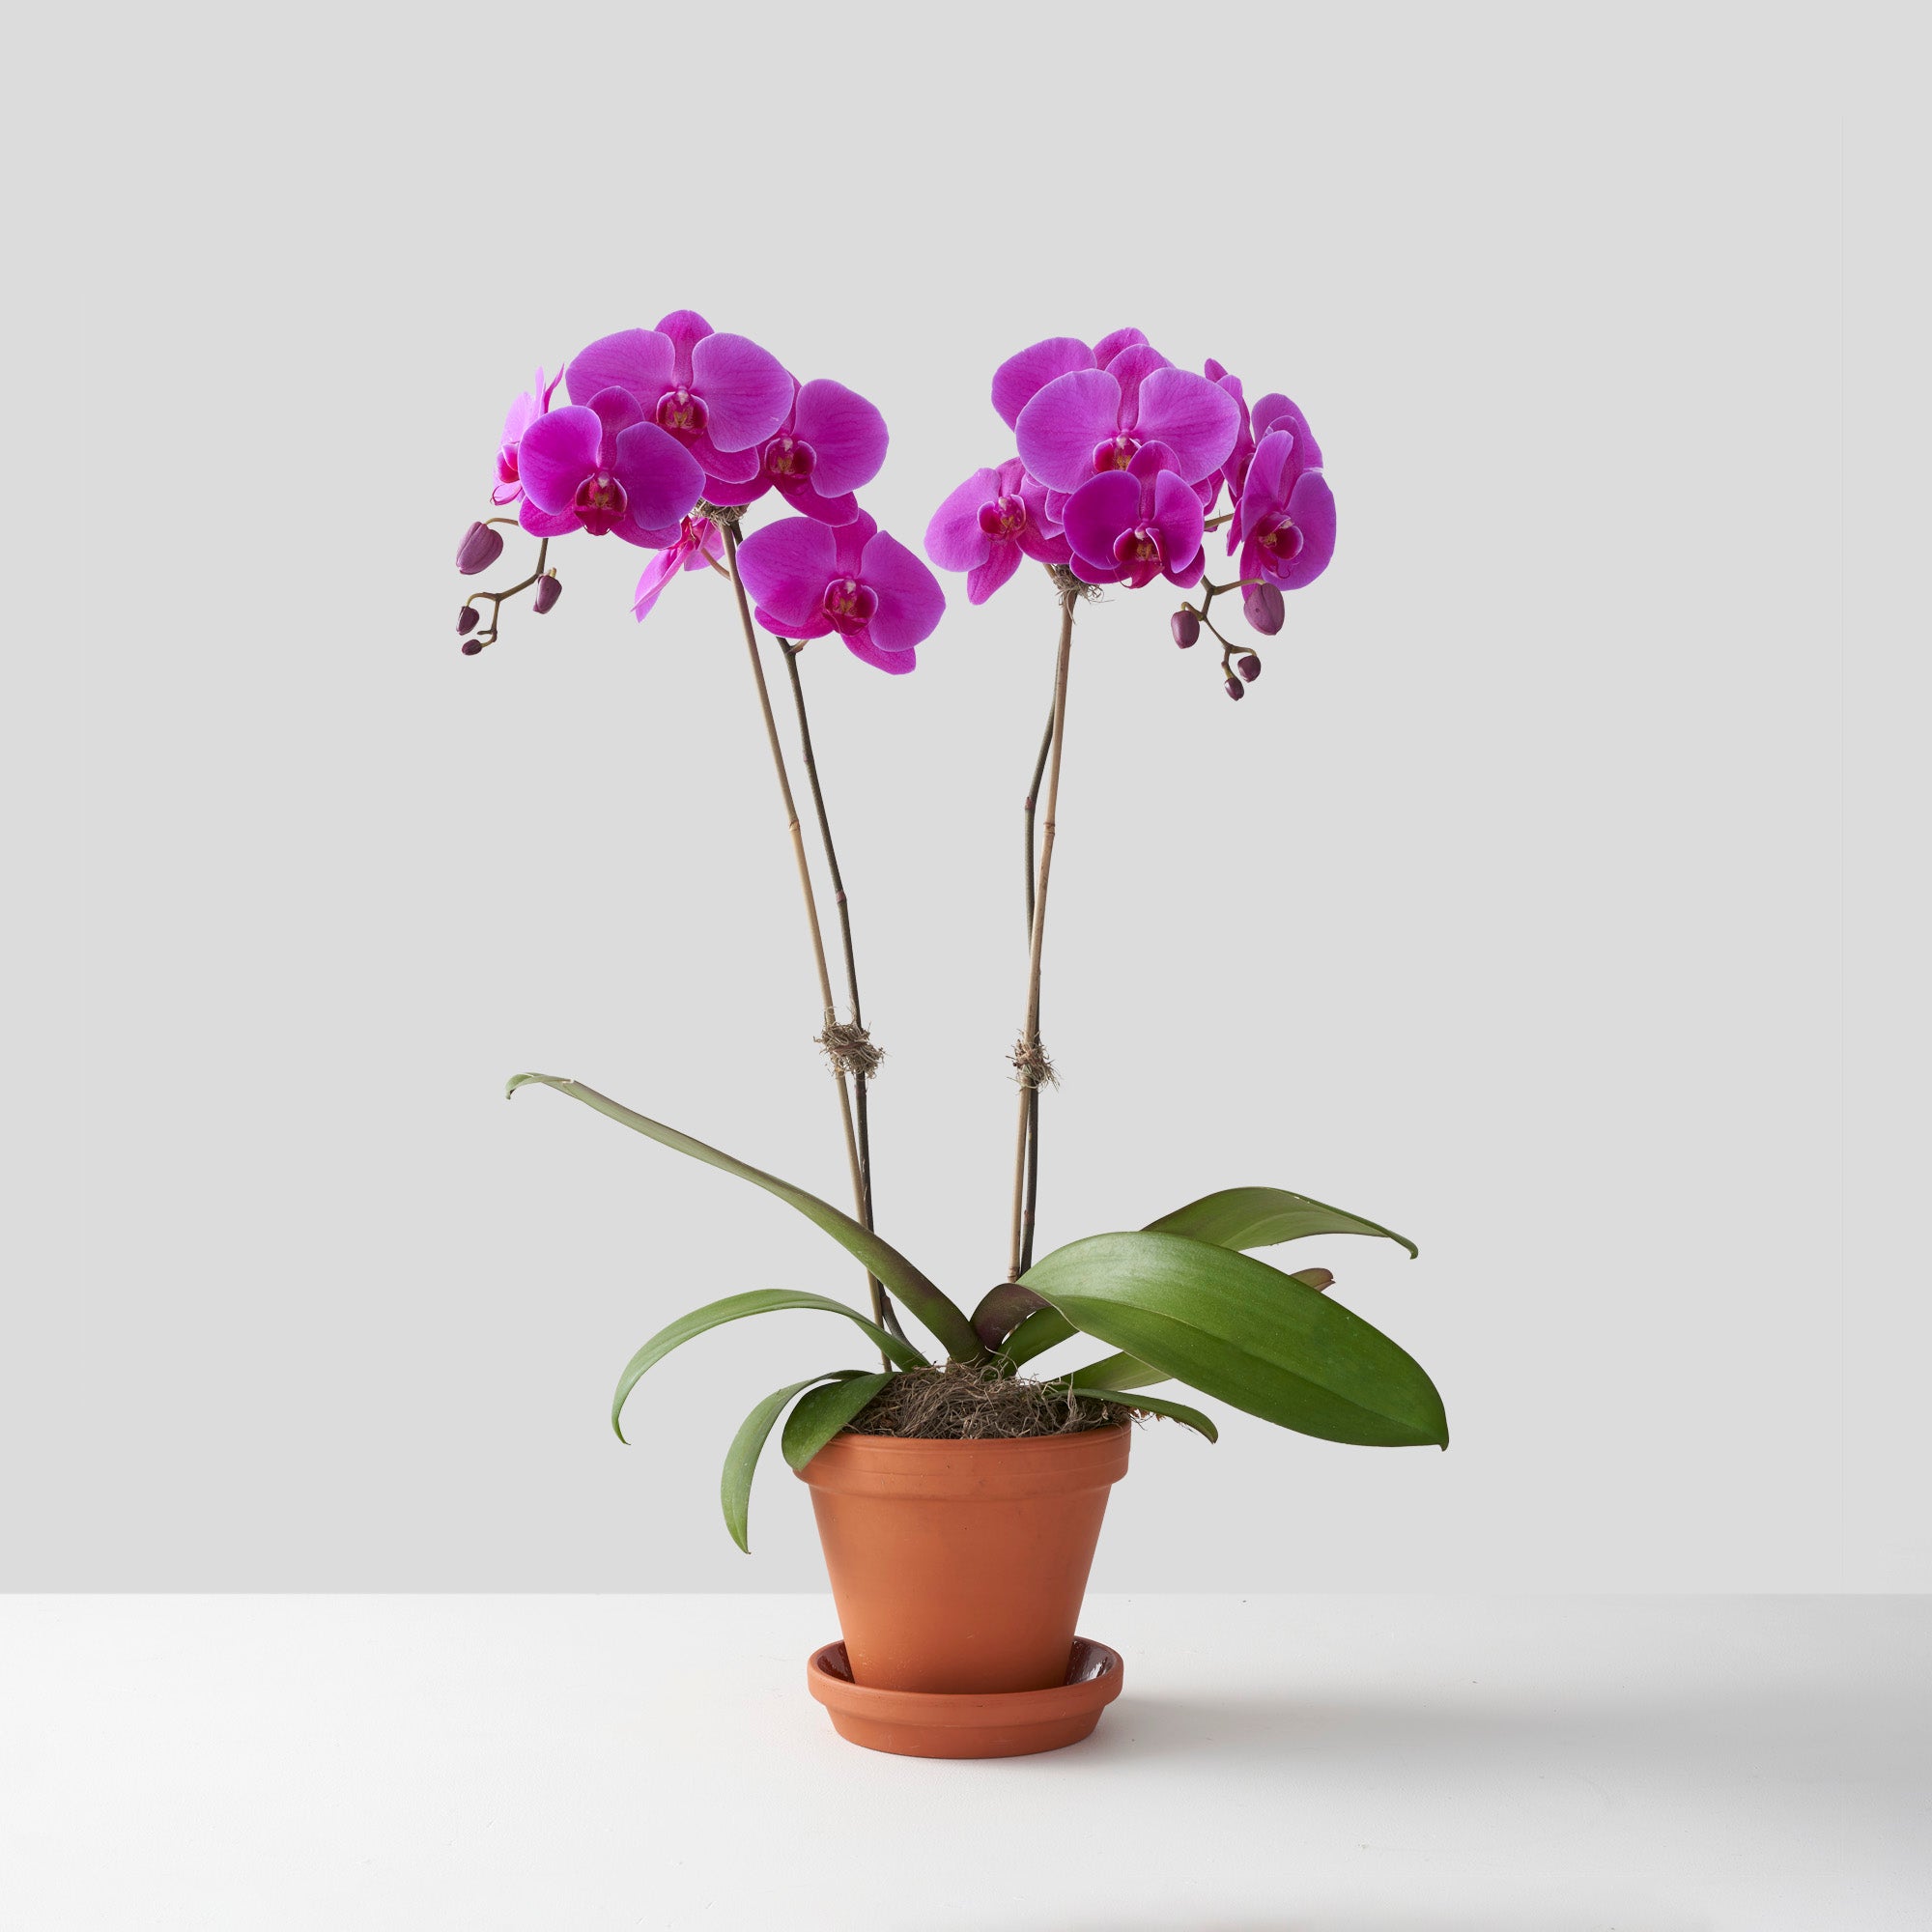 Fuchsia pink phalaenopsis orchid plant, with two stems, in clay pot with saucer, on white background.